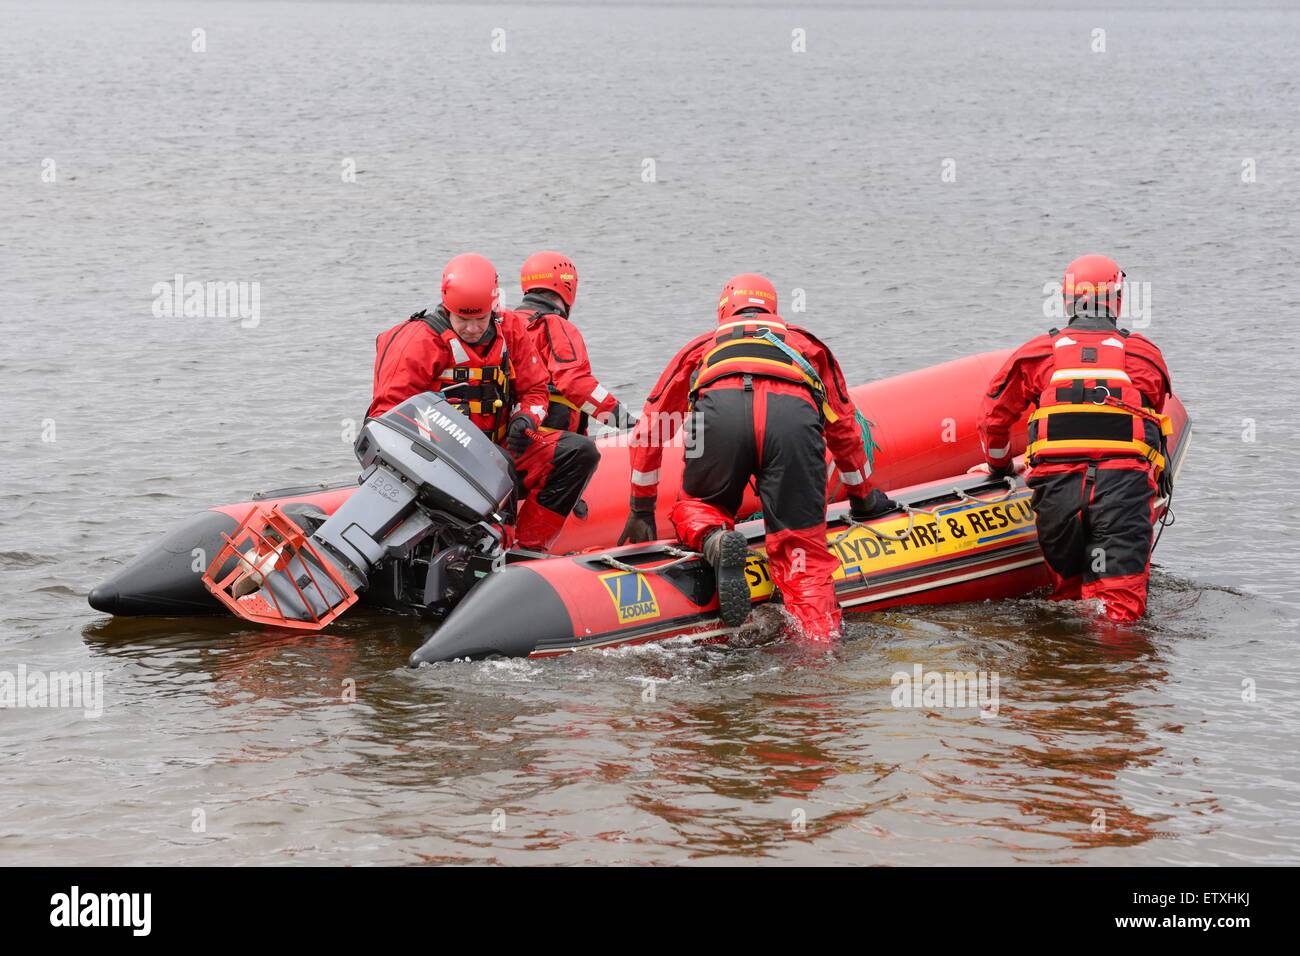 Fire service boat rescue team prepare to embark on a training exercise Stock Photo